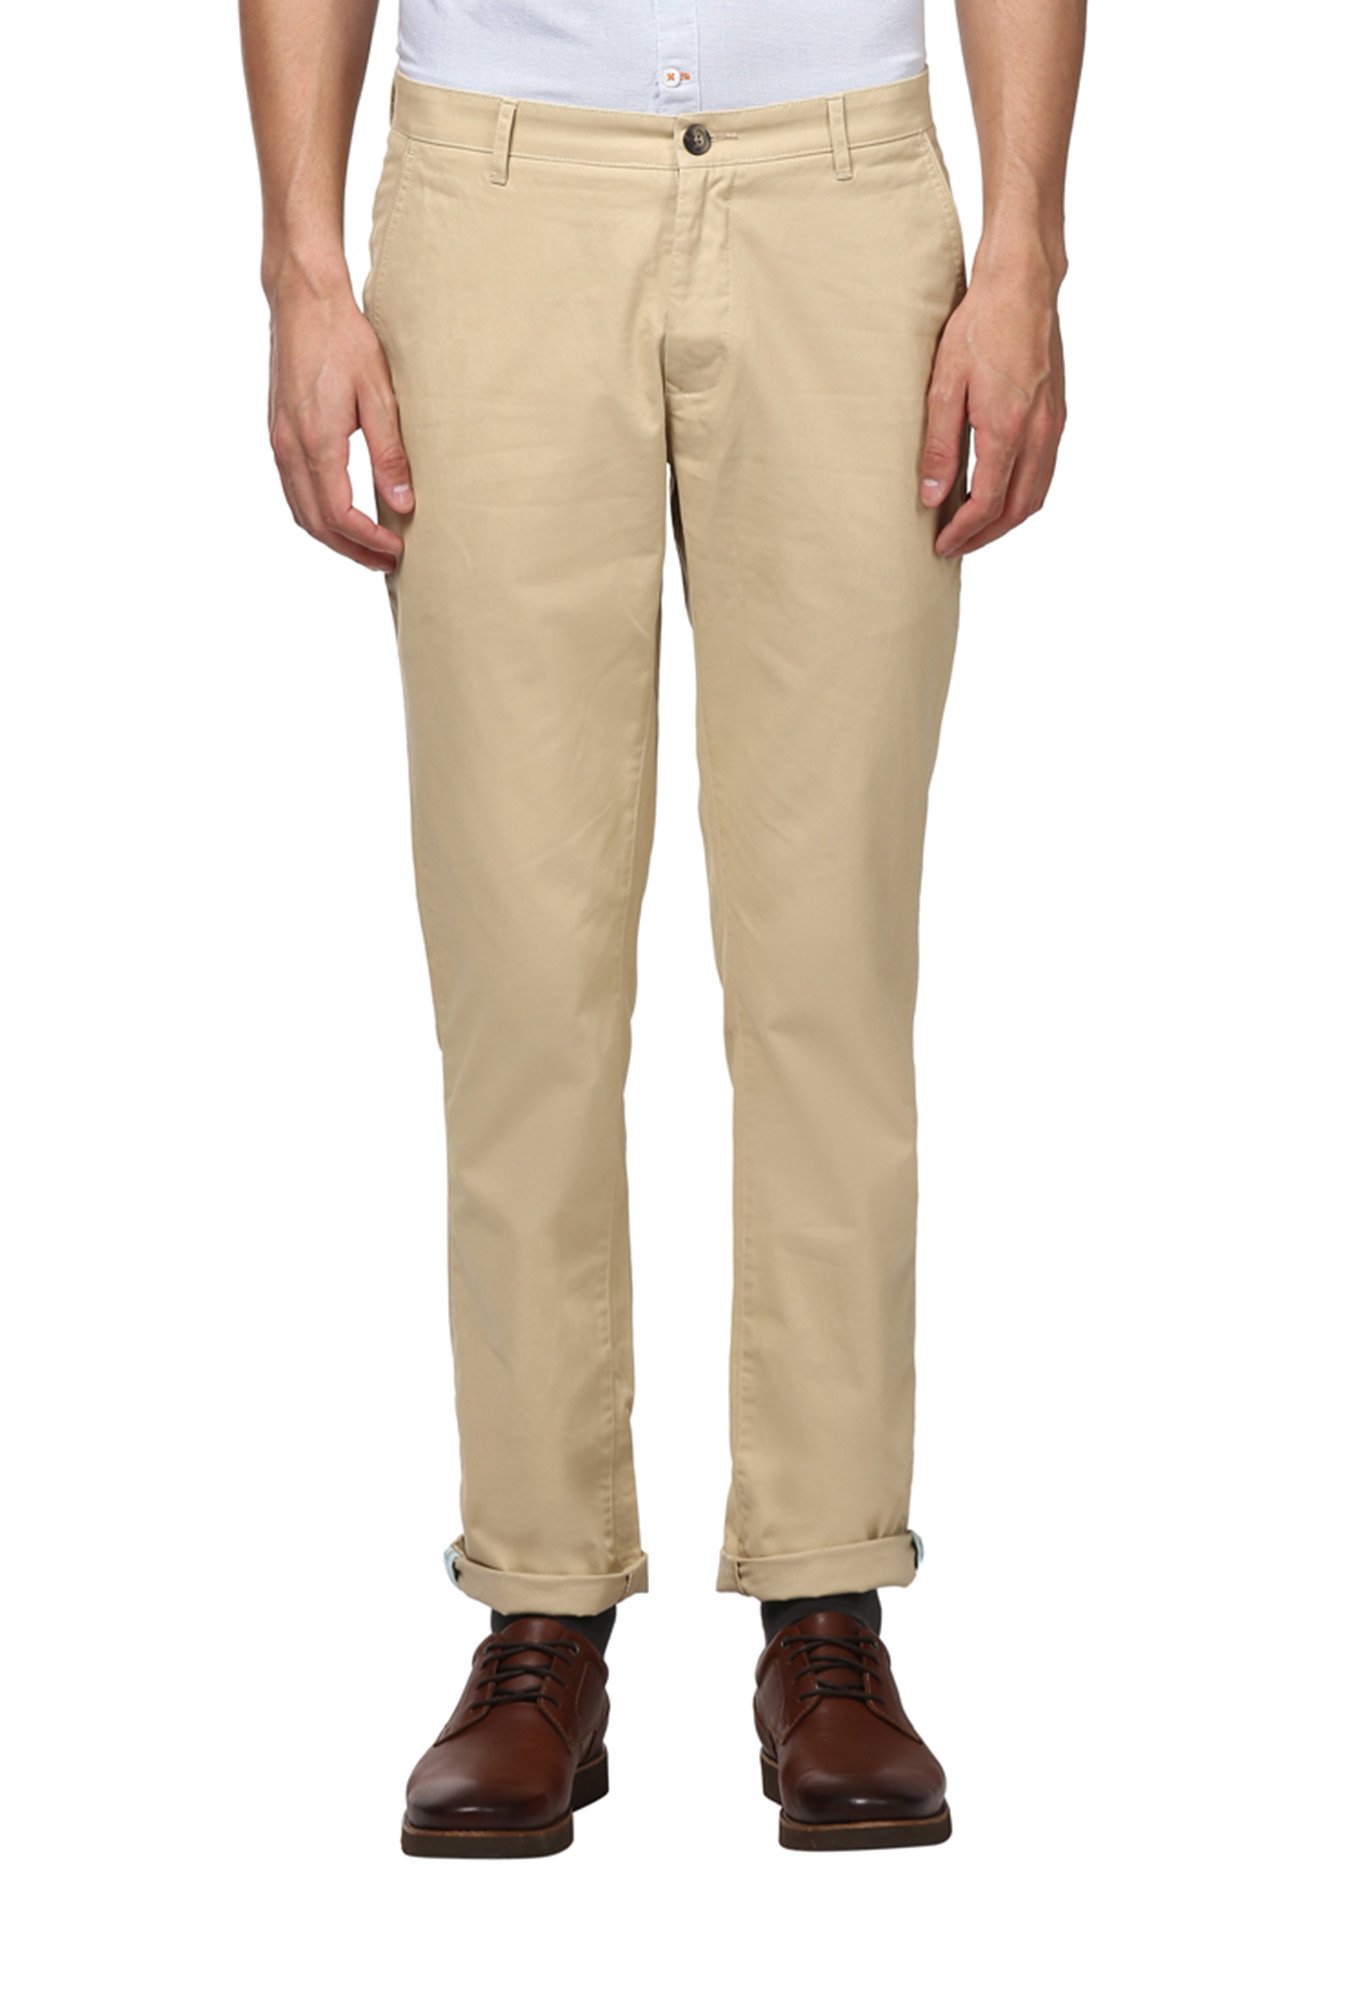 Colorplus Trousers  Buy Colorplus Trousers online in India